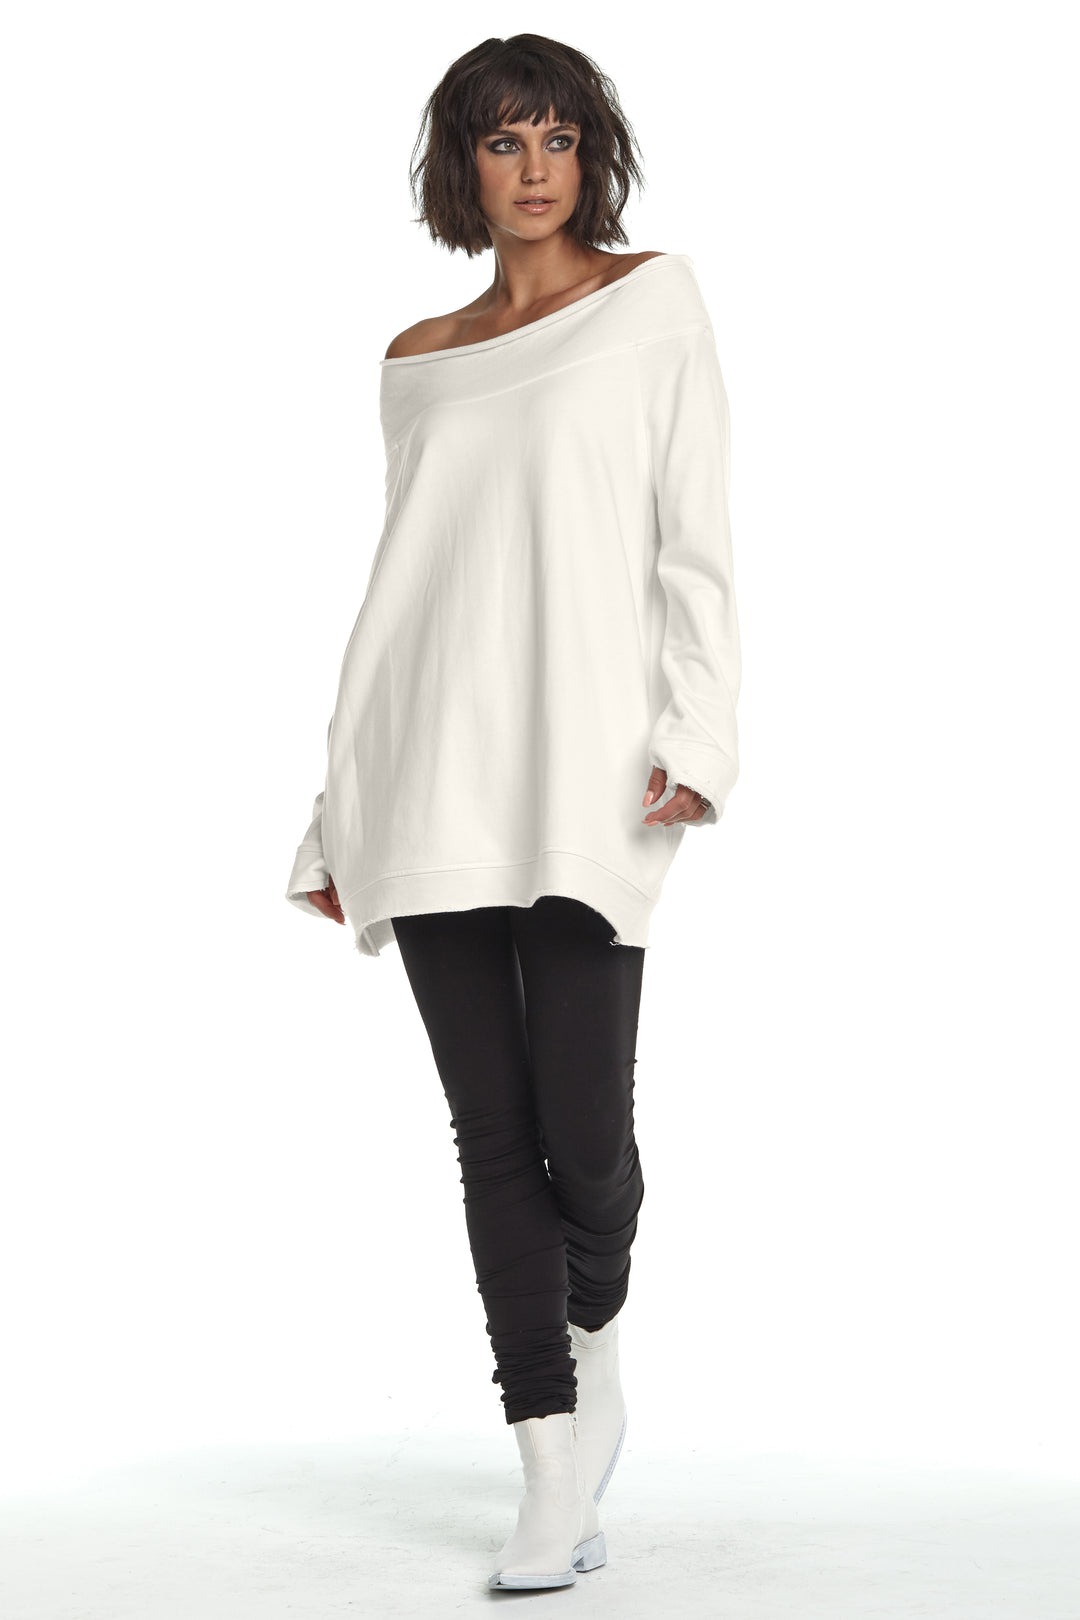 French Terry Off the Shoulder Tunic